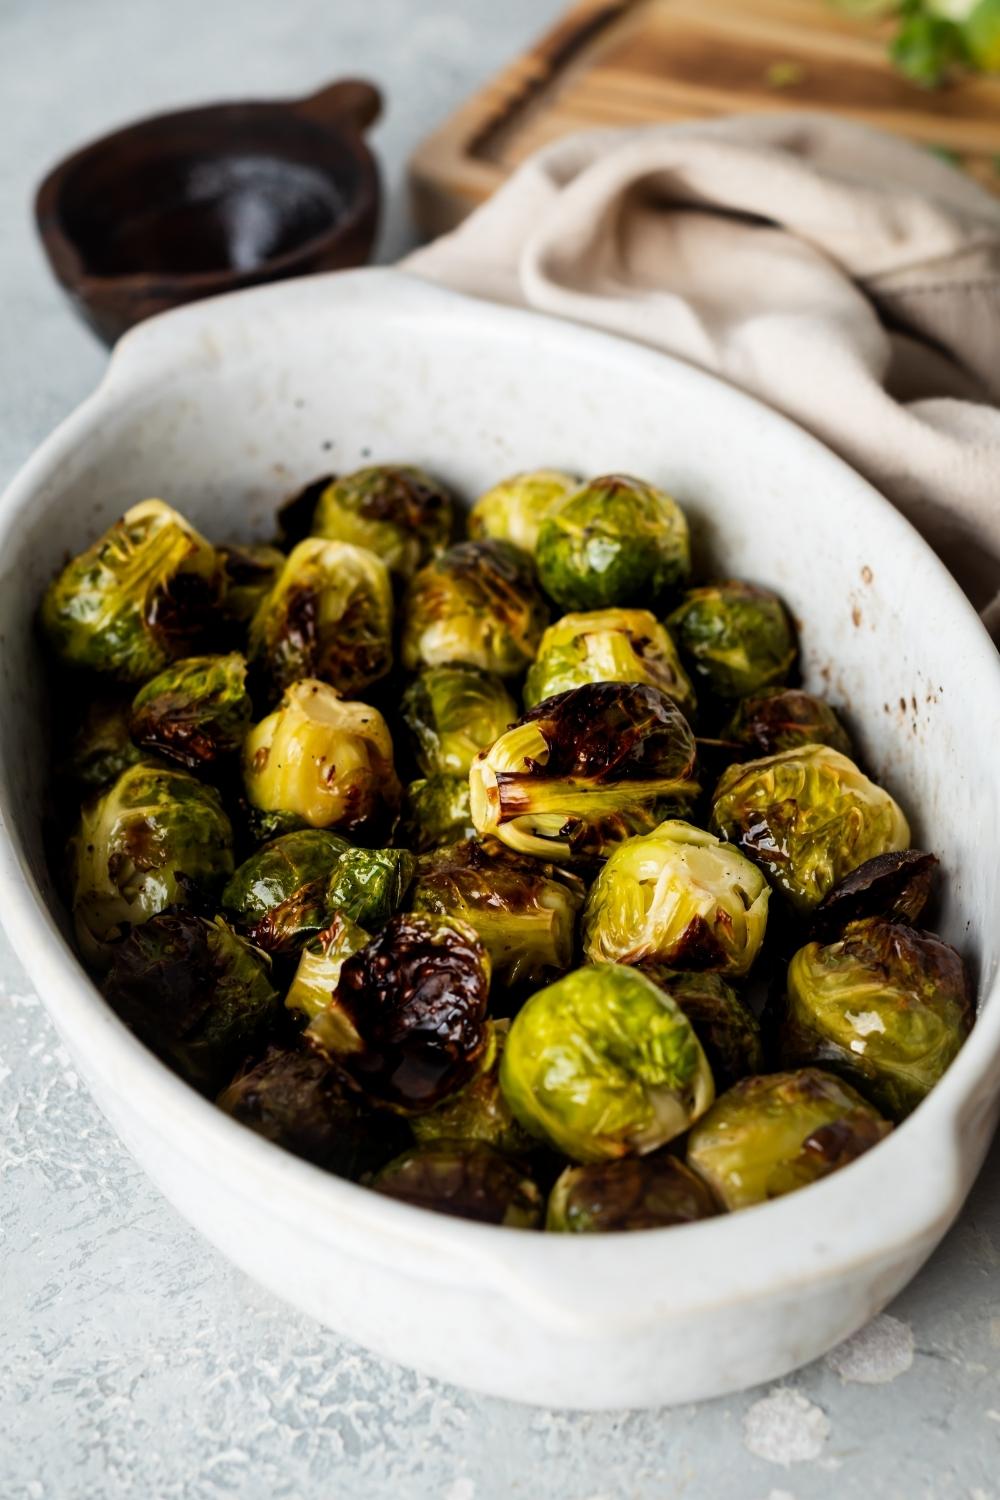 A casserole dish with cooked brussels sprouts.